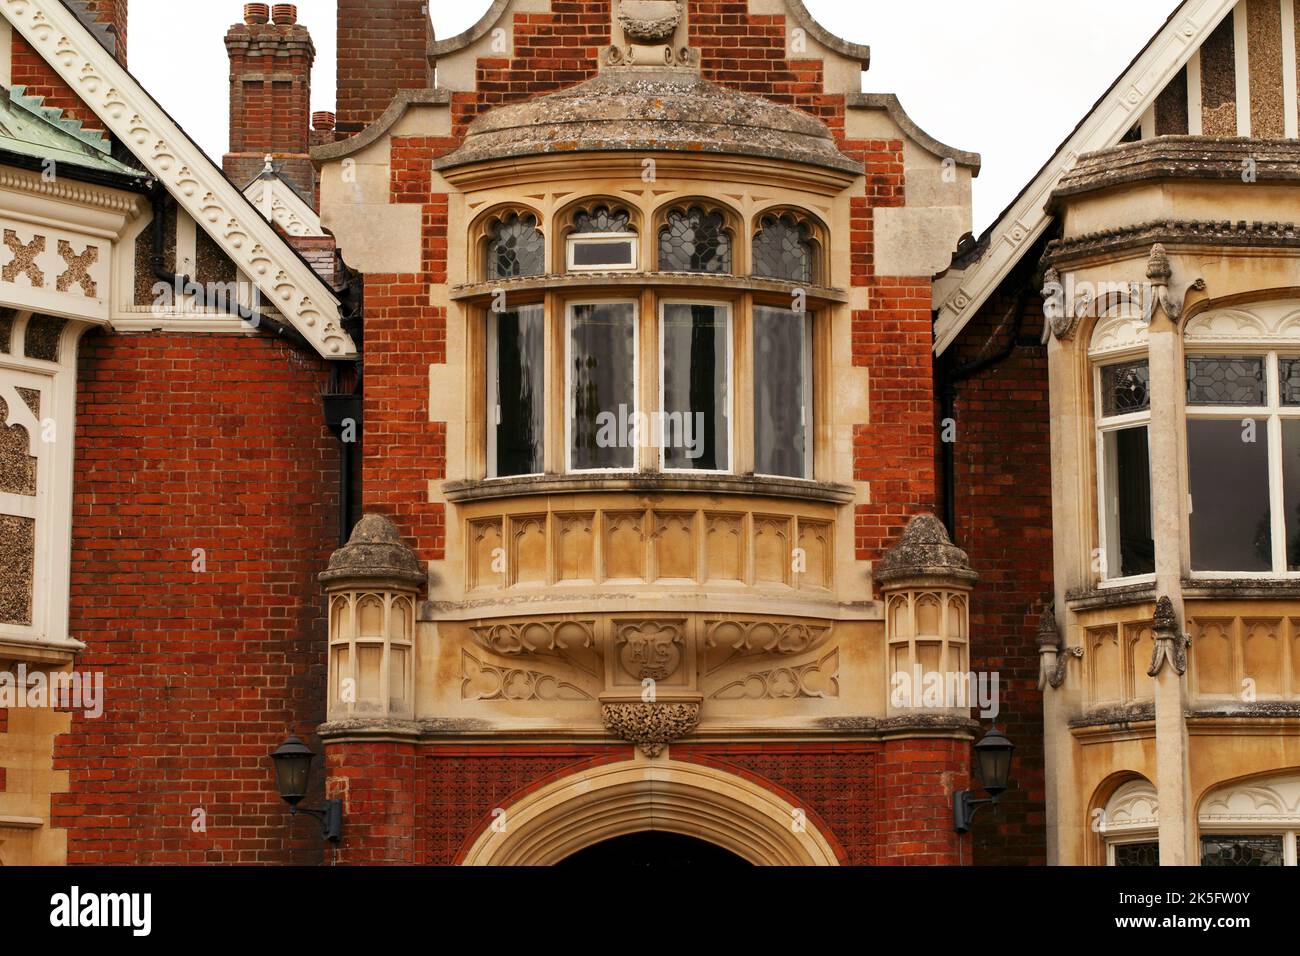 Exterior facade to Bletchley Park house, home to MI6 and the wartime codebreakers. Stock Photo